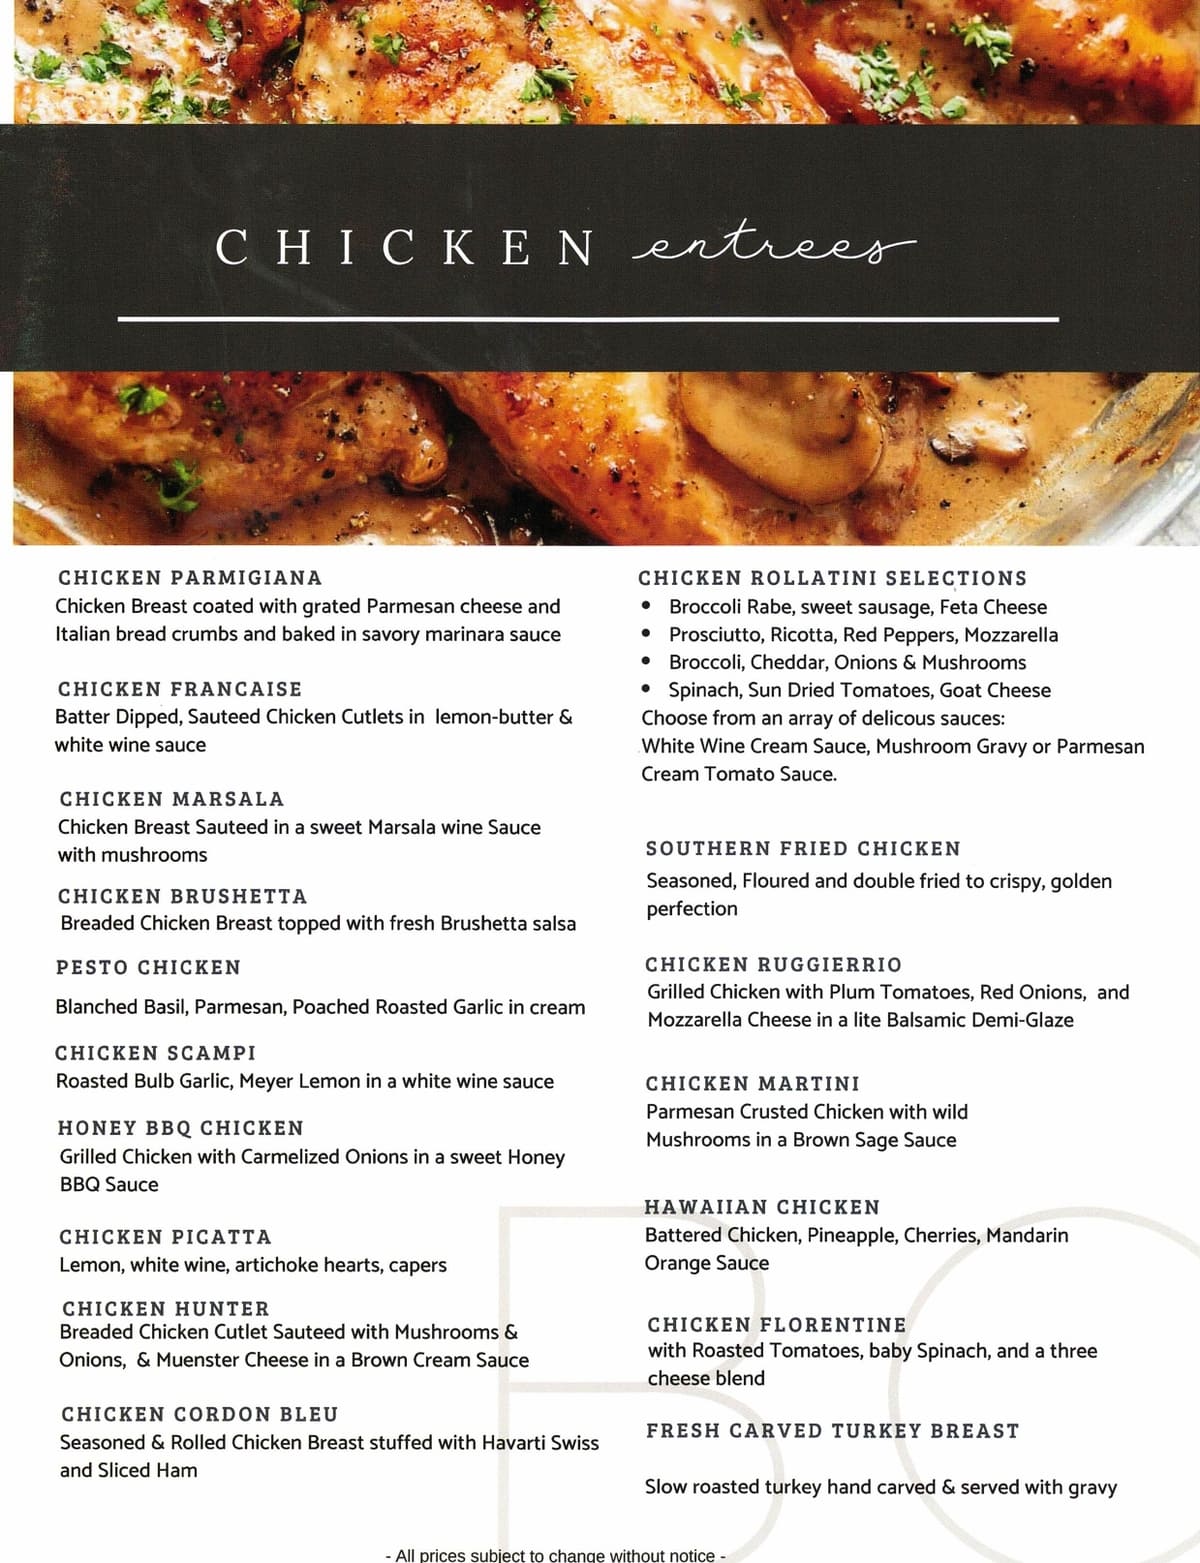 Catering Menu - Chicken Entrees